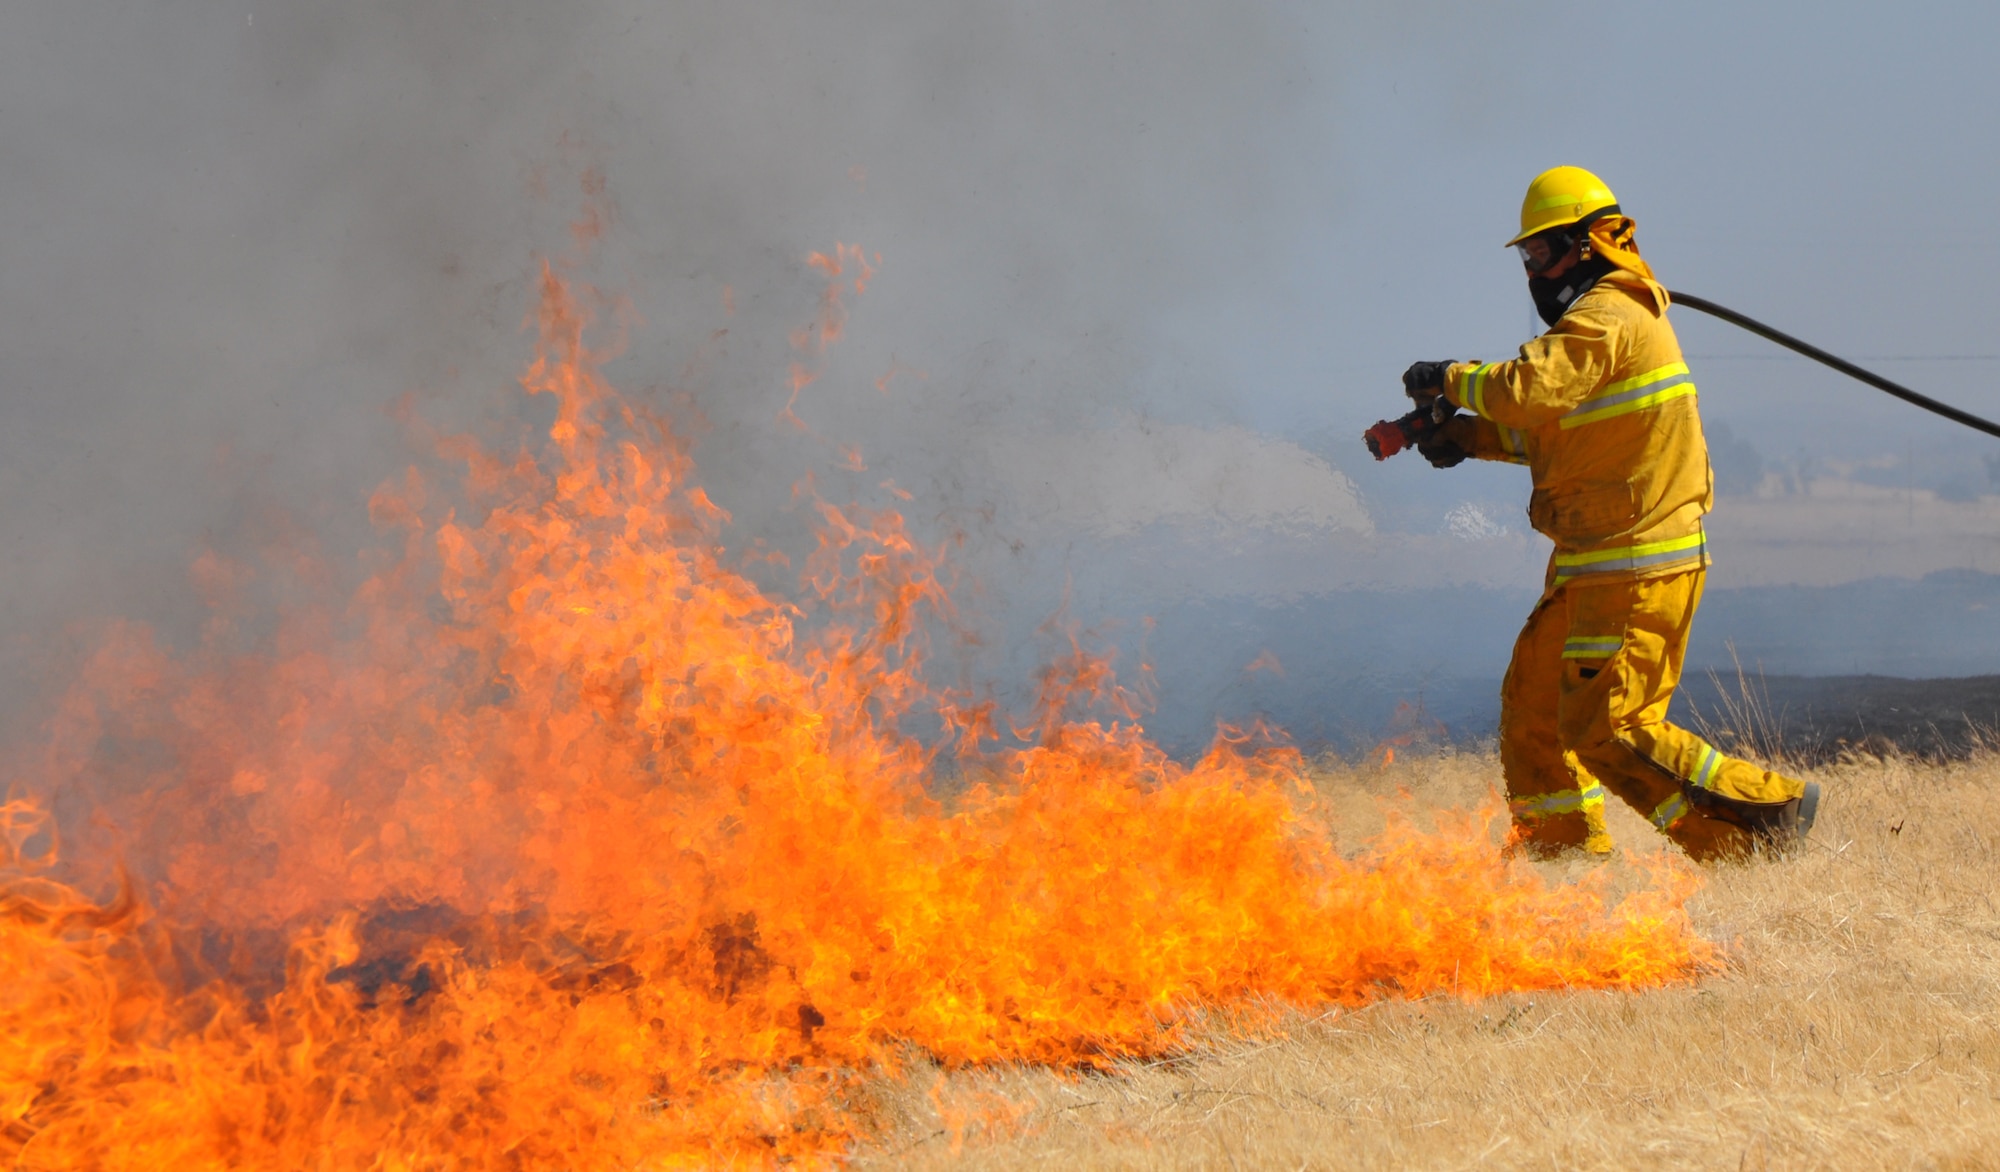 A U.S. Air Force firefighter battles a grass fire at Beale Air Force Base, Calif., Sept. 13, 2012. Beale firefighters often support local fire departments during the fire season. (U.S. Air Force photo by Staff Sgt. Robert M. Trujillo/Released)